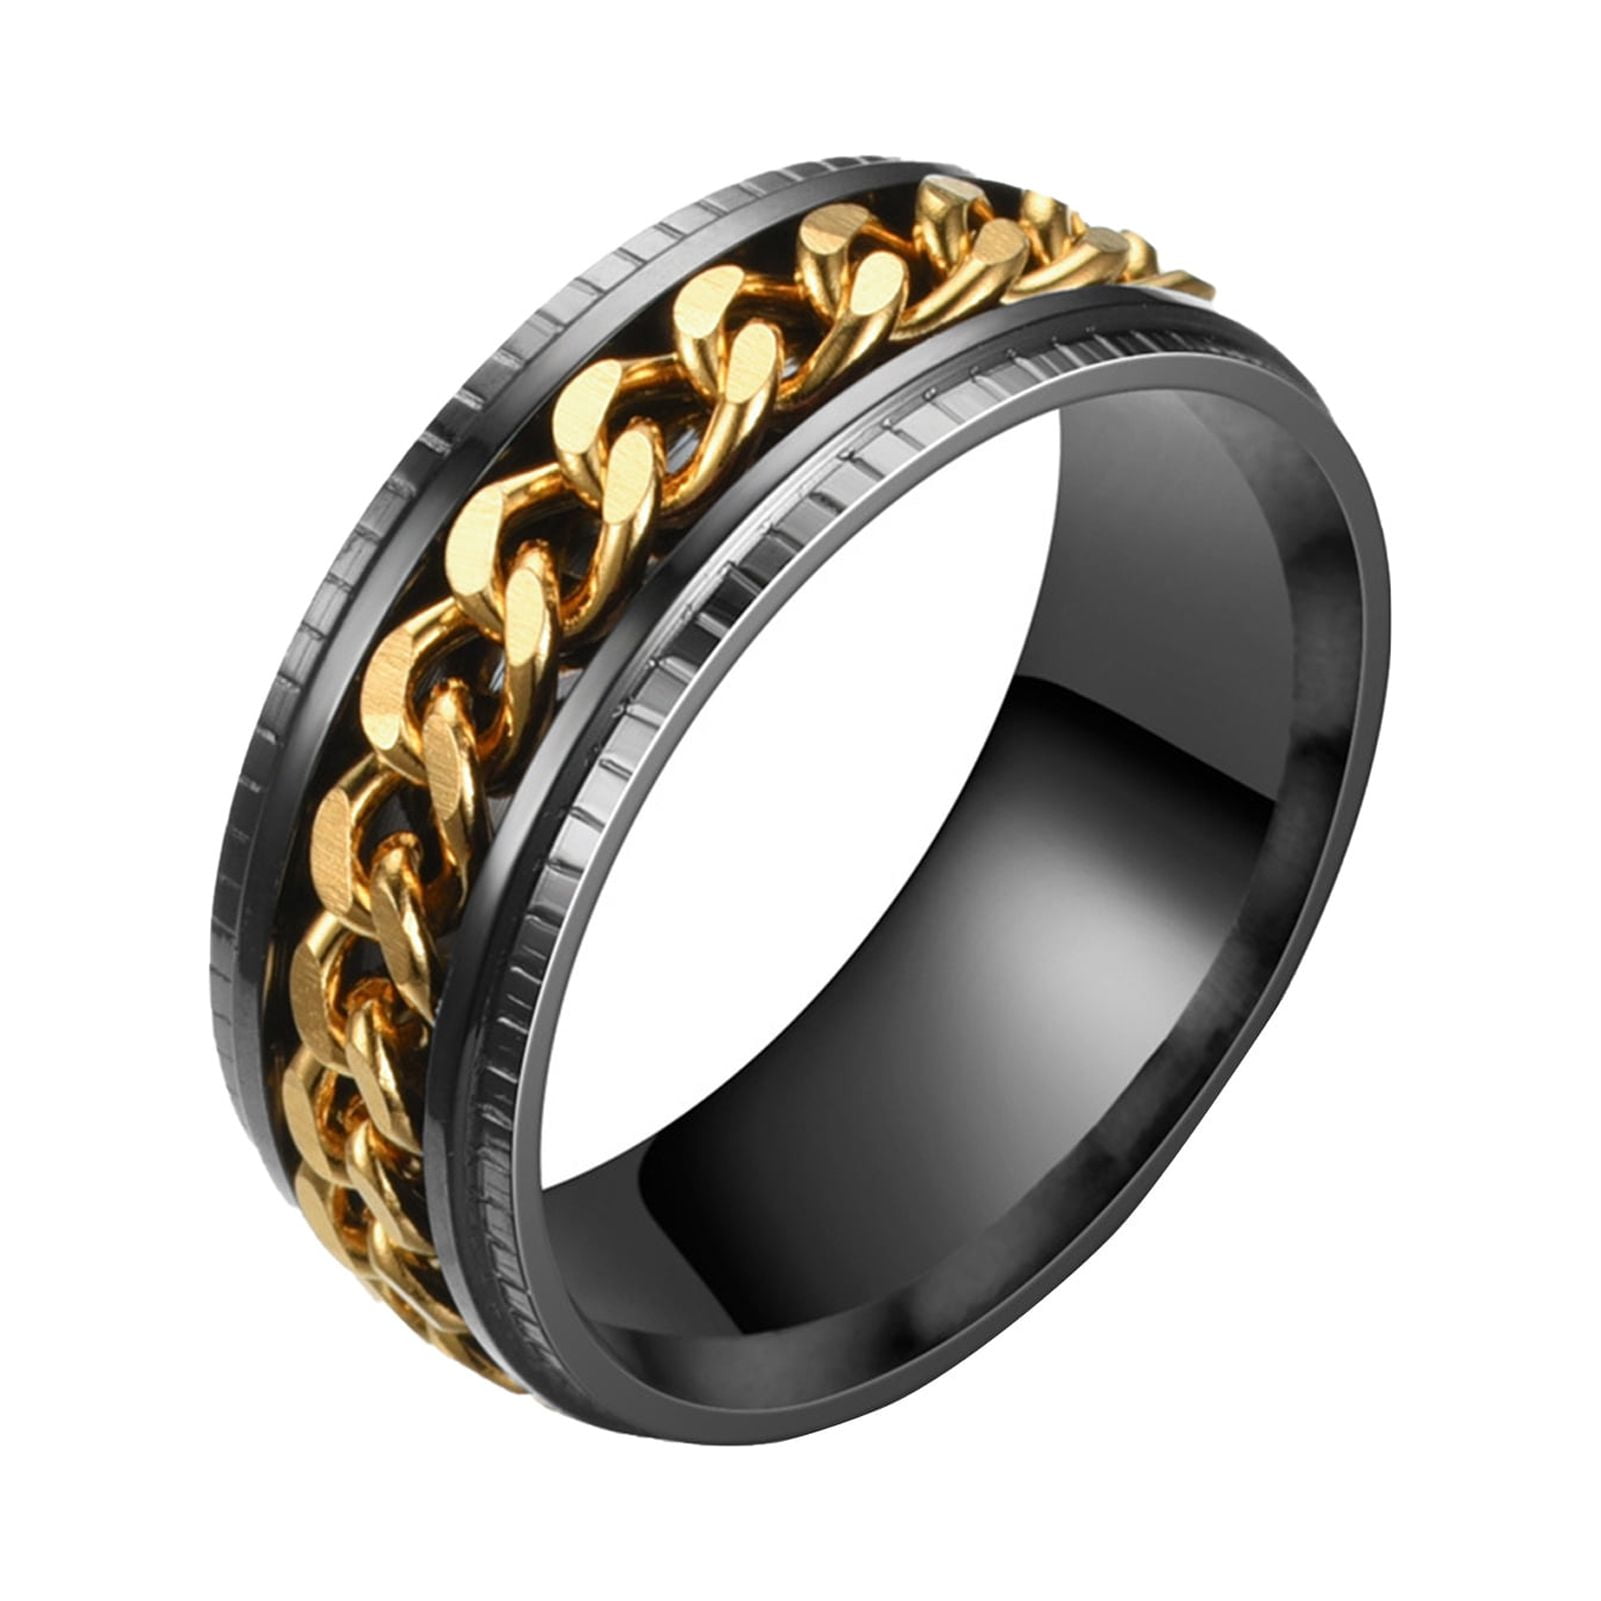 Honrane Men Ring Simple High Polished Fashion Jewelry Rotating Chain Inlaid Finger Ring for Party f65abd9a e870 443f 869e eb1aeea33af0.8078ef801a665837c4f851ed3f98521d